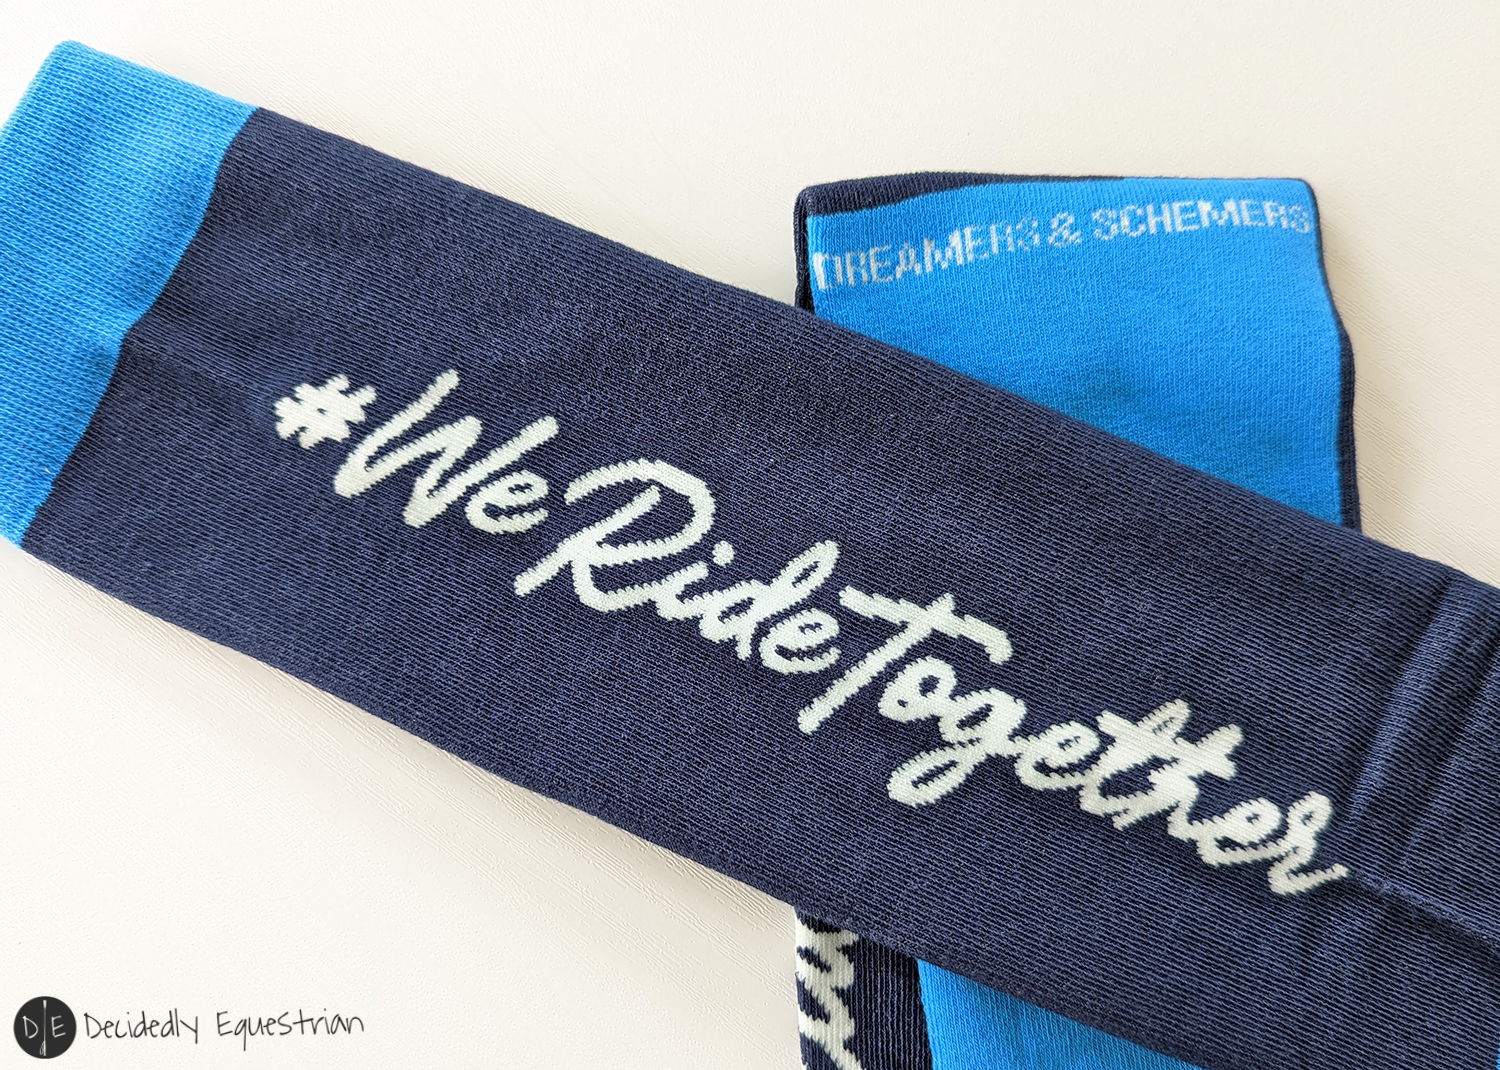 Dreamers & Schemers #weridetogether Knit Boot Socks